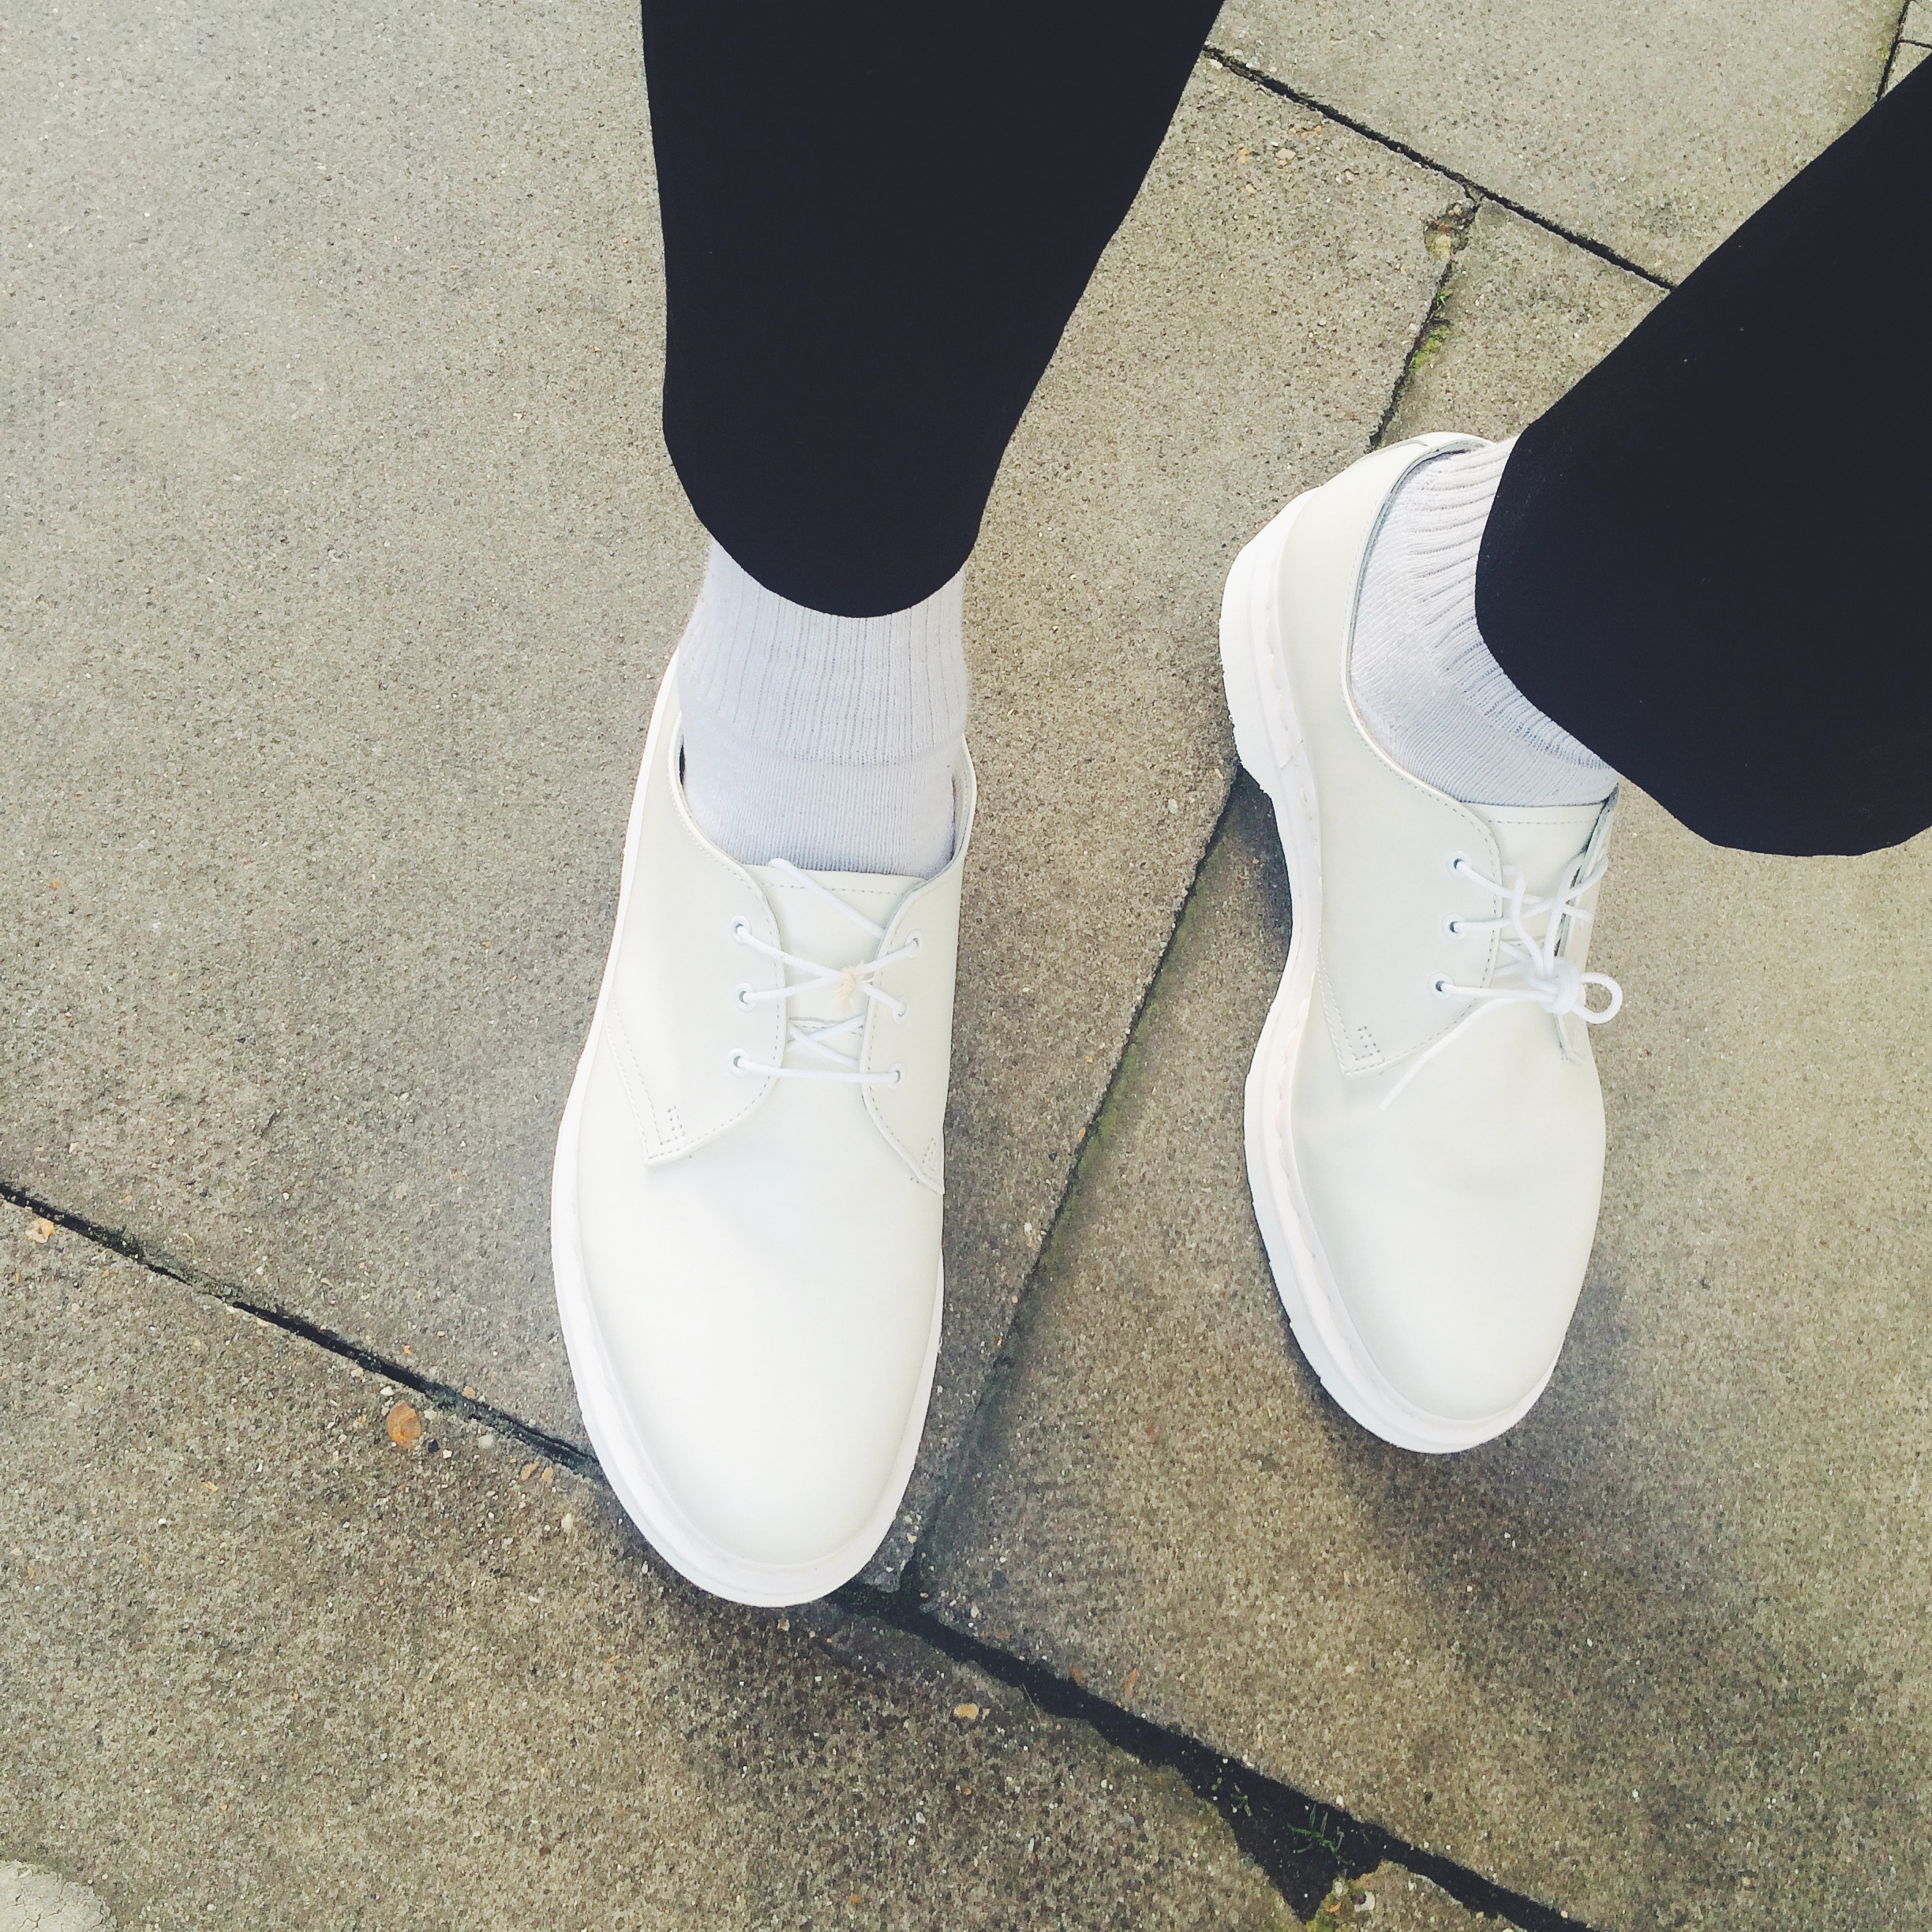 Dr Martens All-White 1461 Spring/Summer 2015 Mono Shoes